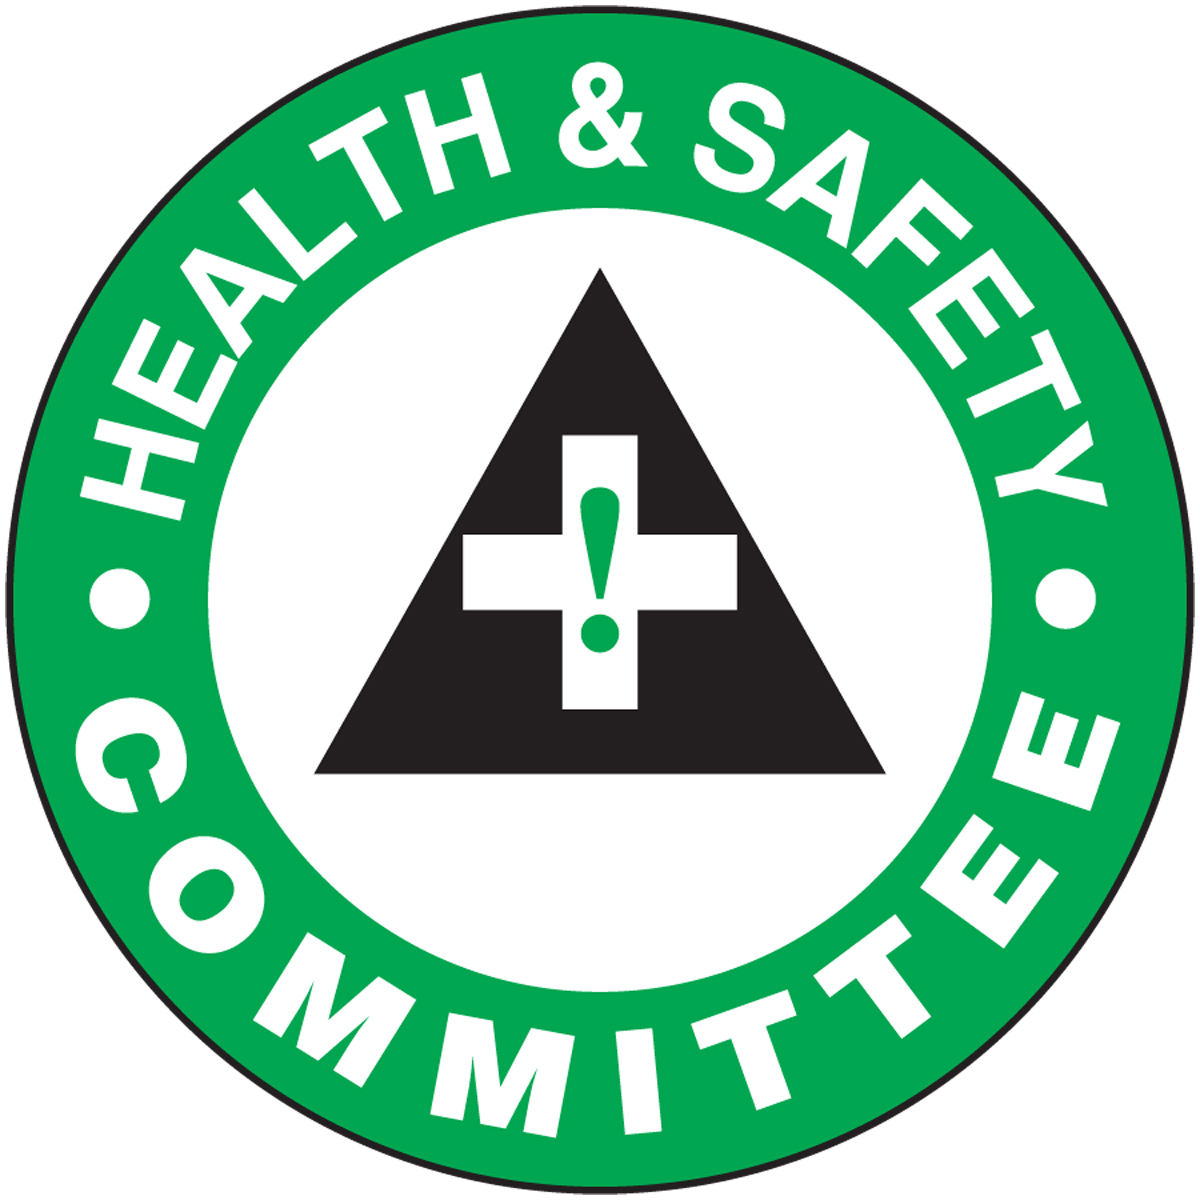 HEALTH AND SAFETY COMMITTEE